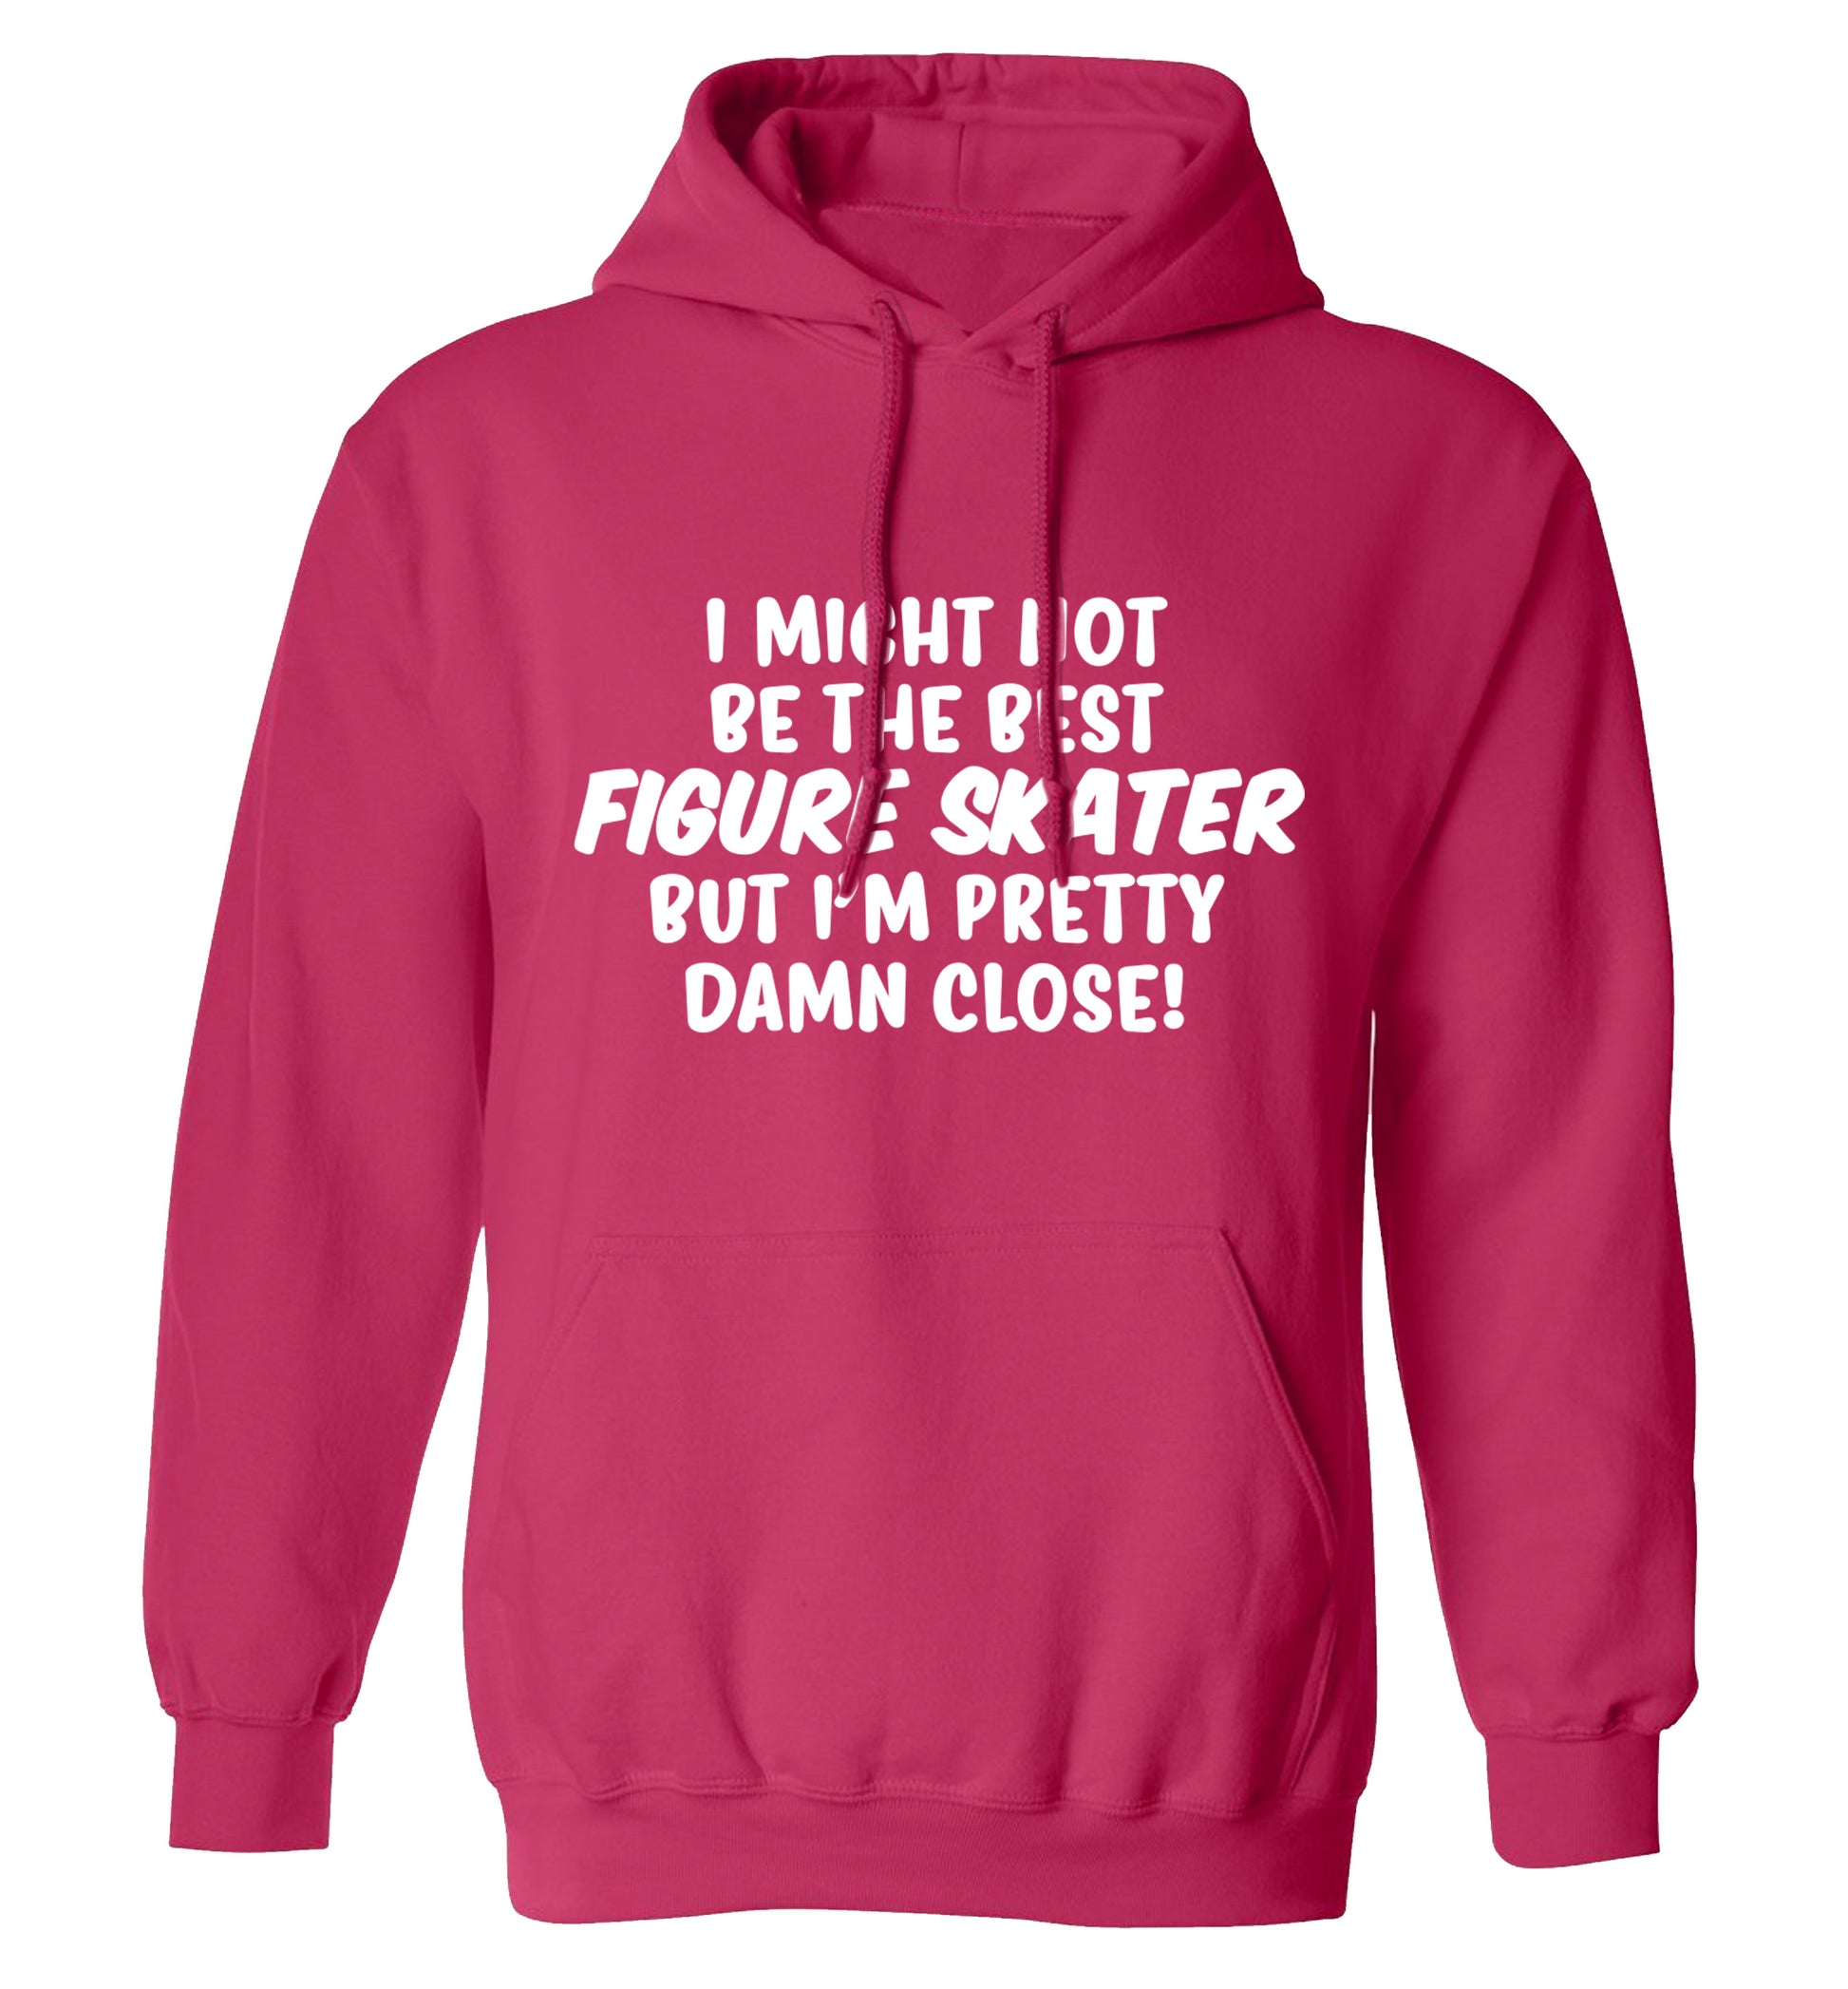 I might not be the best figure skater but I'm pretty damn close! adults unisexpink hoodie 2XL